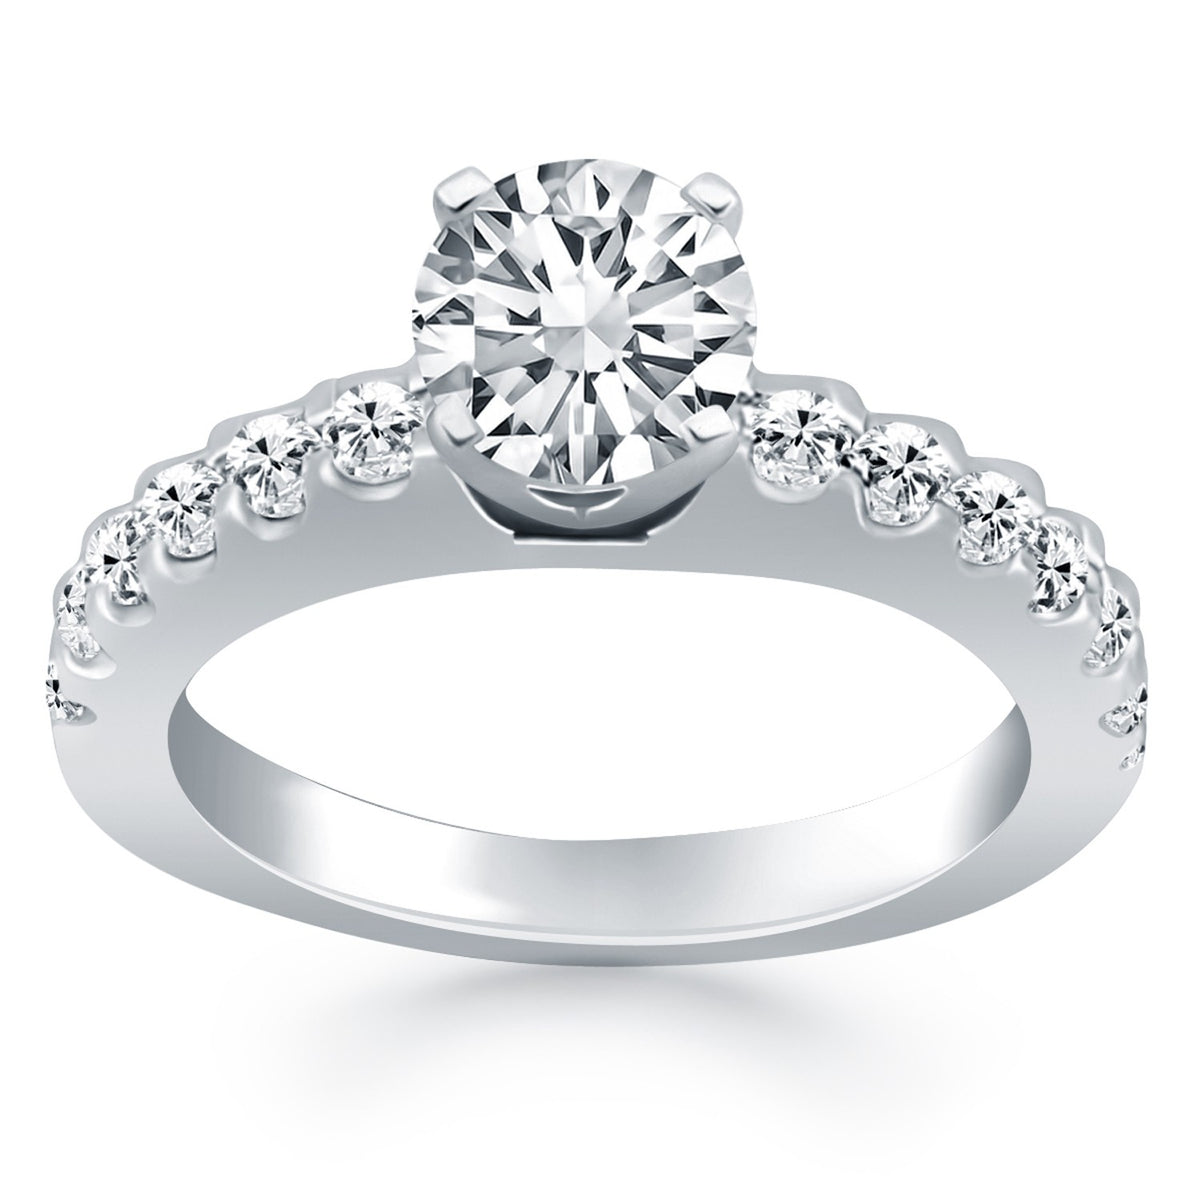 Diamond Micro Prong Cathedral Engagement Ring - 14k White Gold